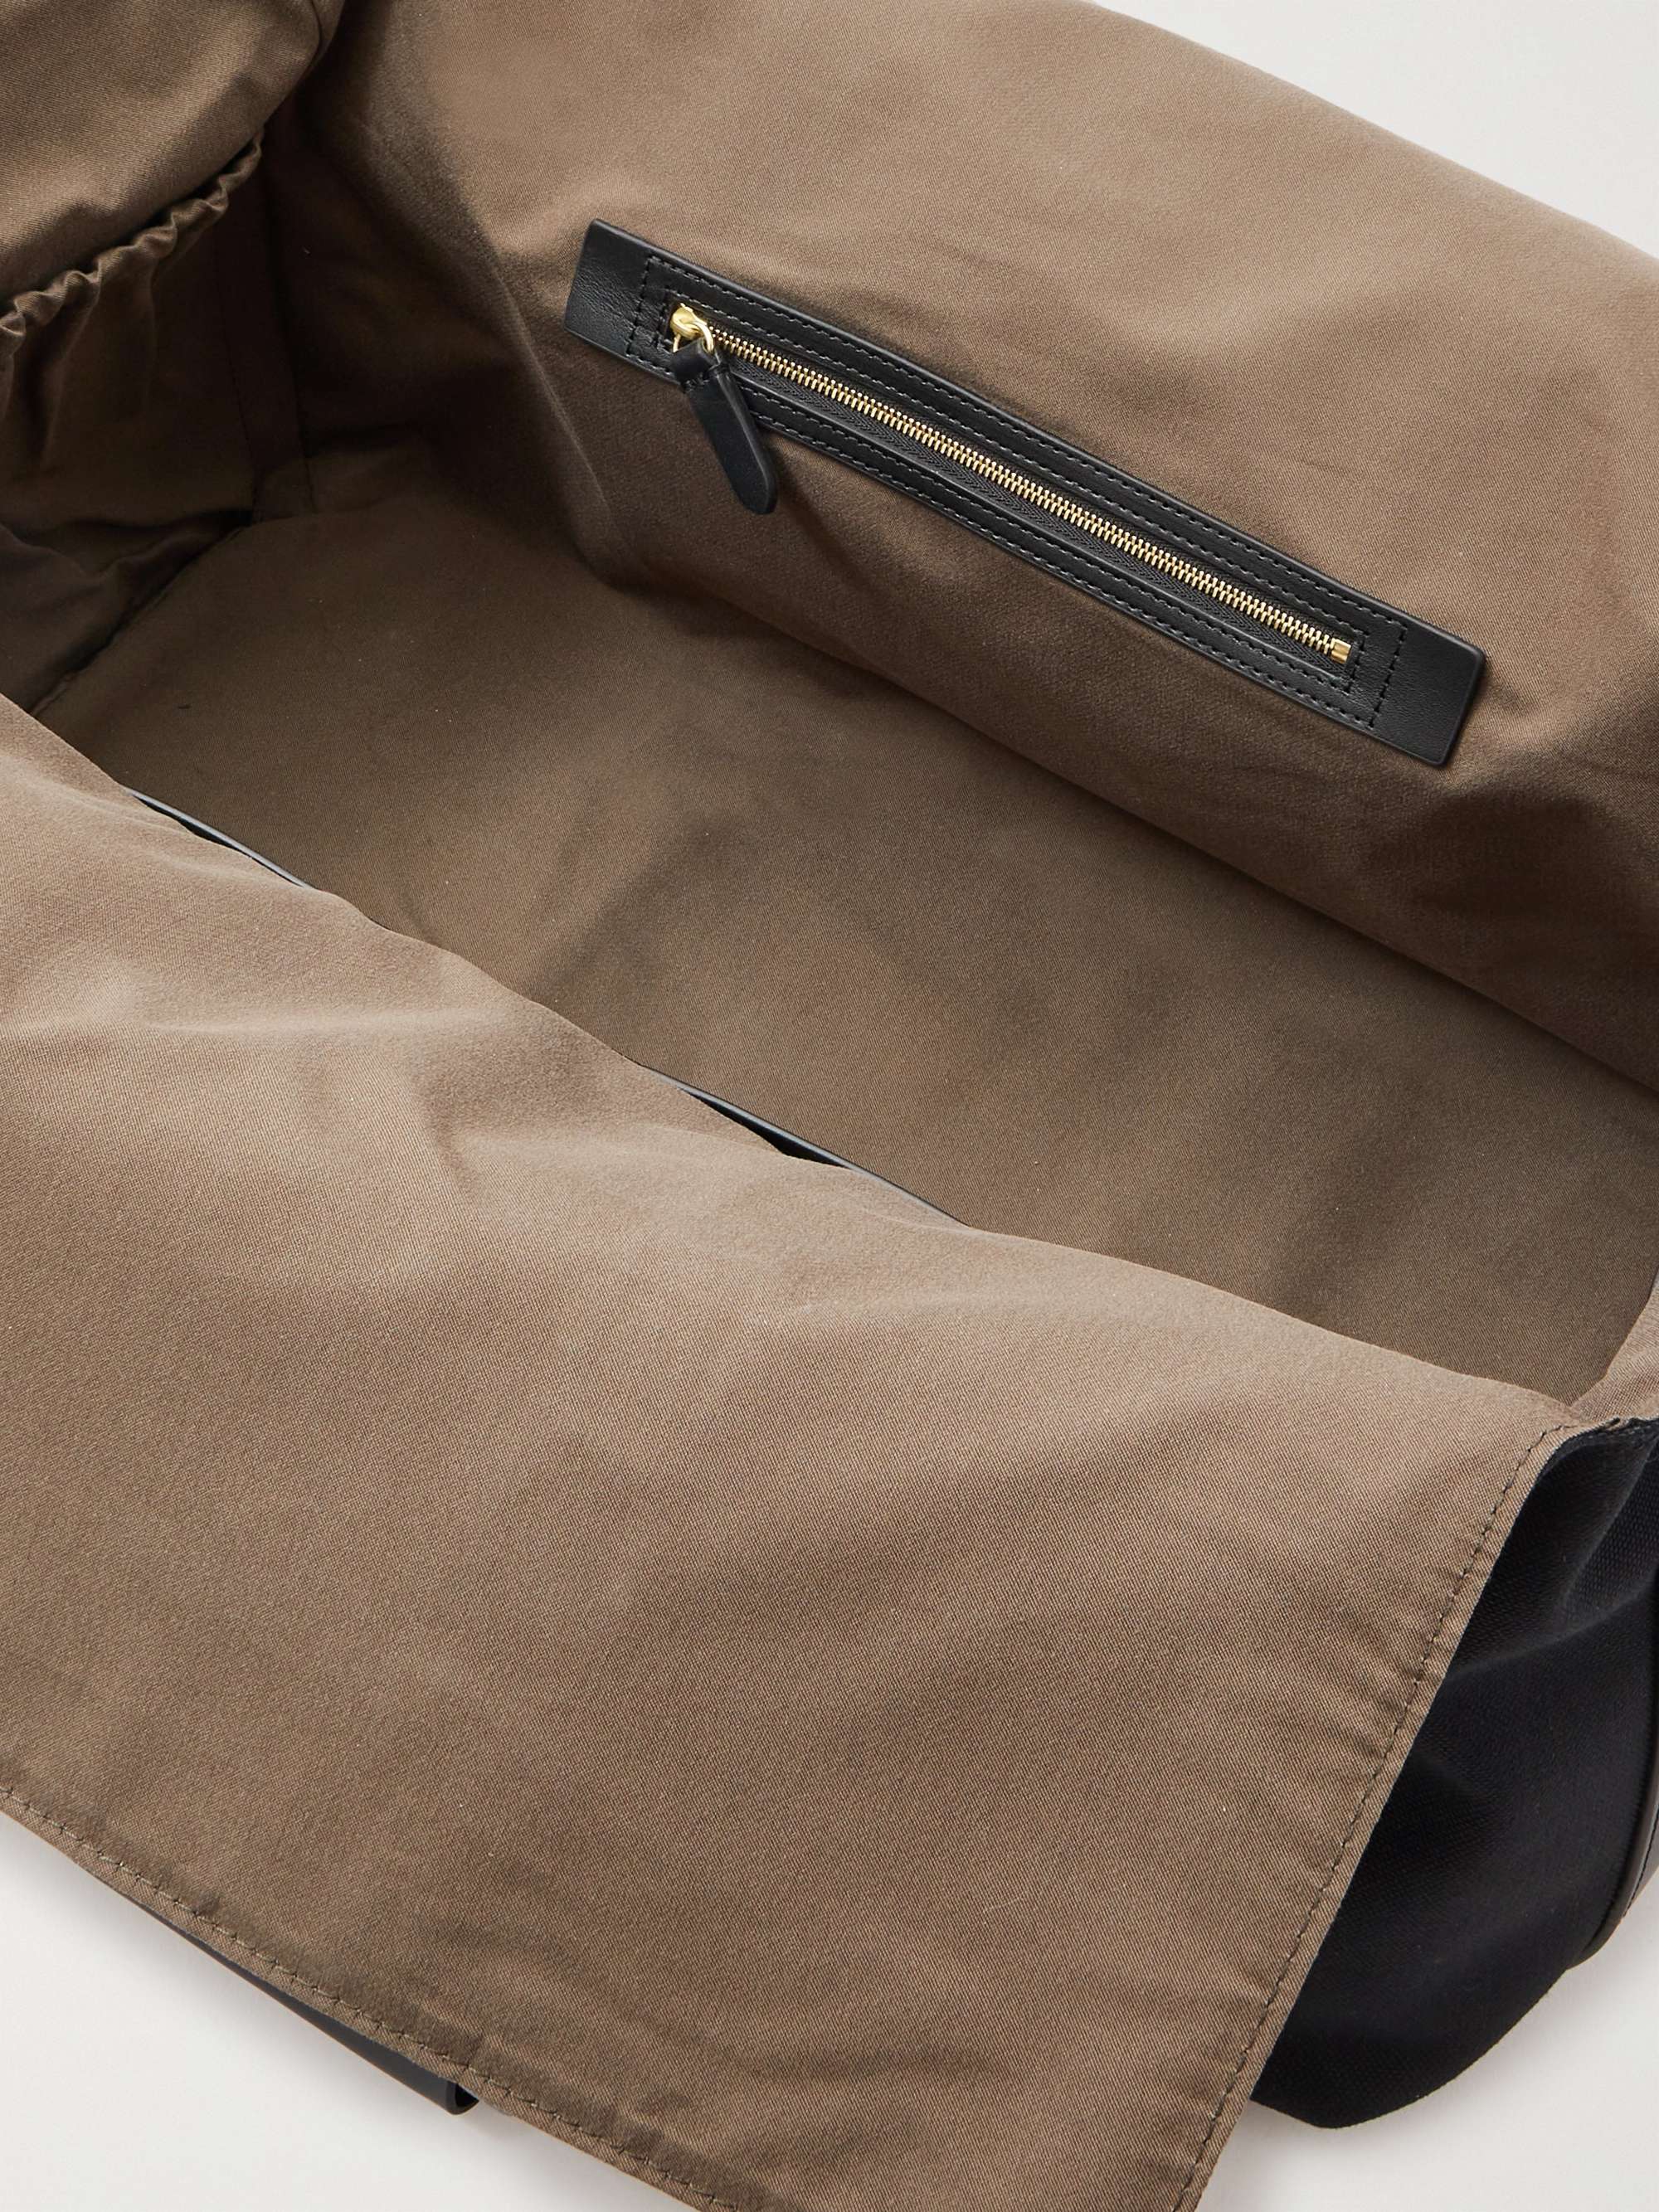 MISMO M/S Supply Leather-Trimmed Canvas Holdall